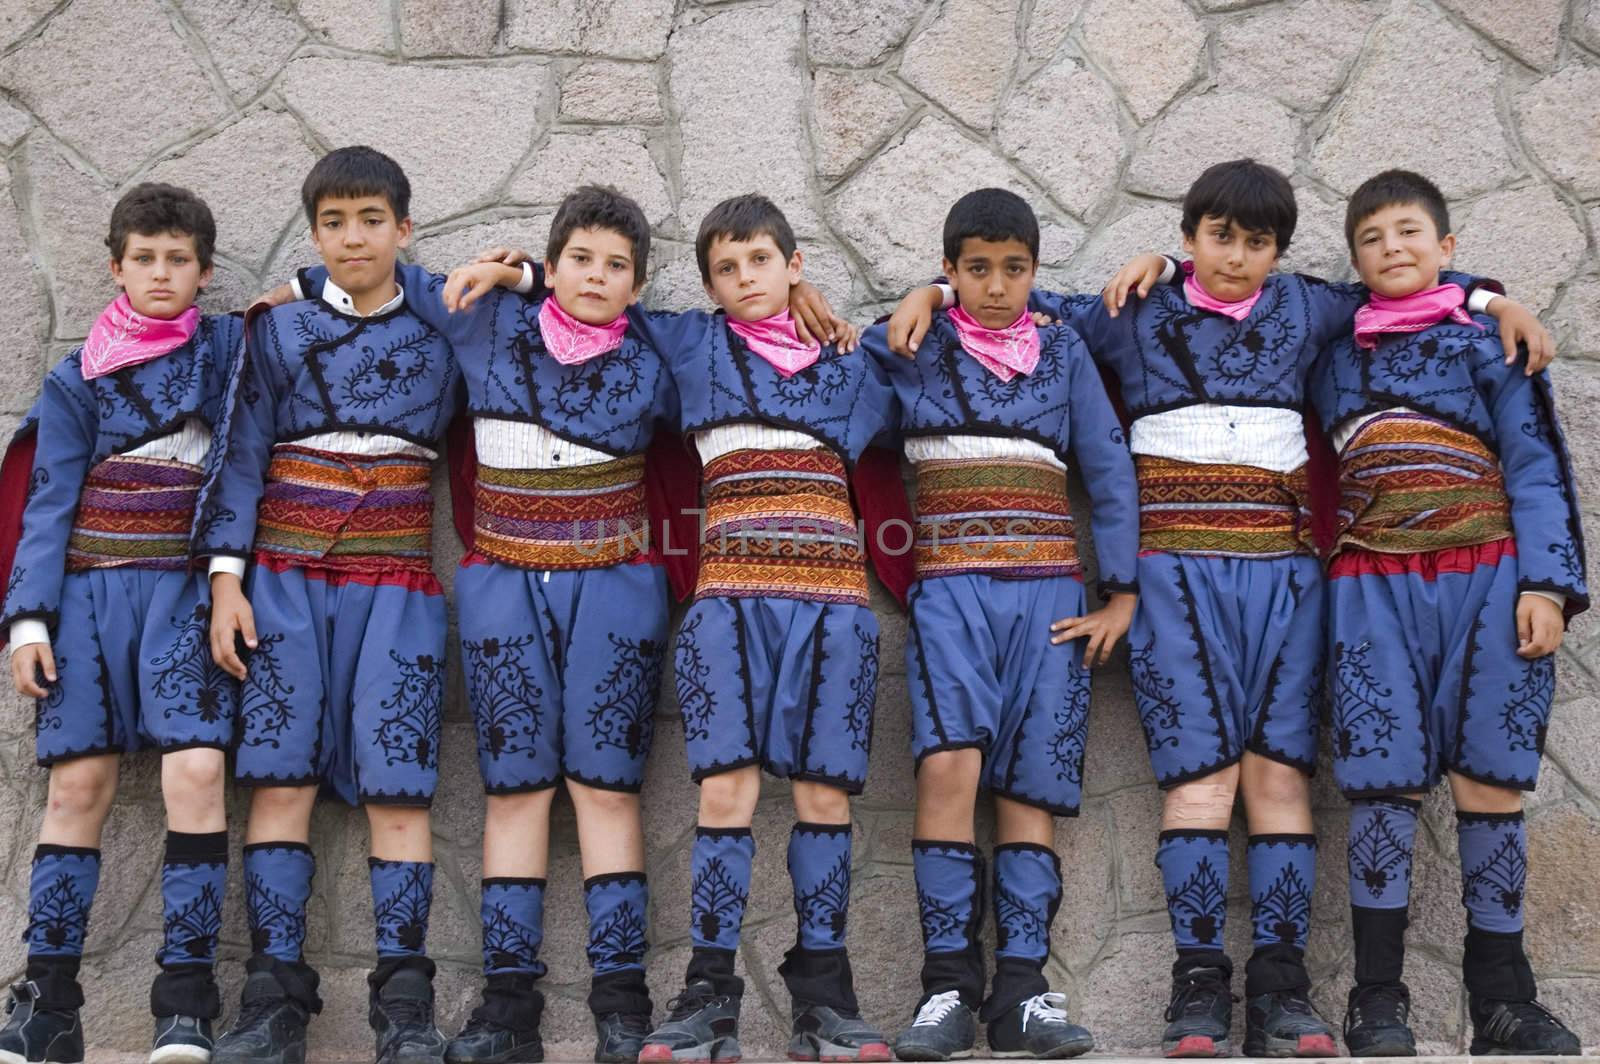 A group of school boys with their traditional Turkish Folk costumes